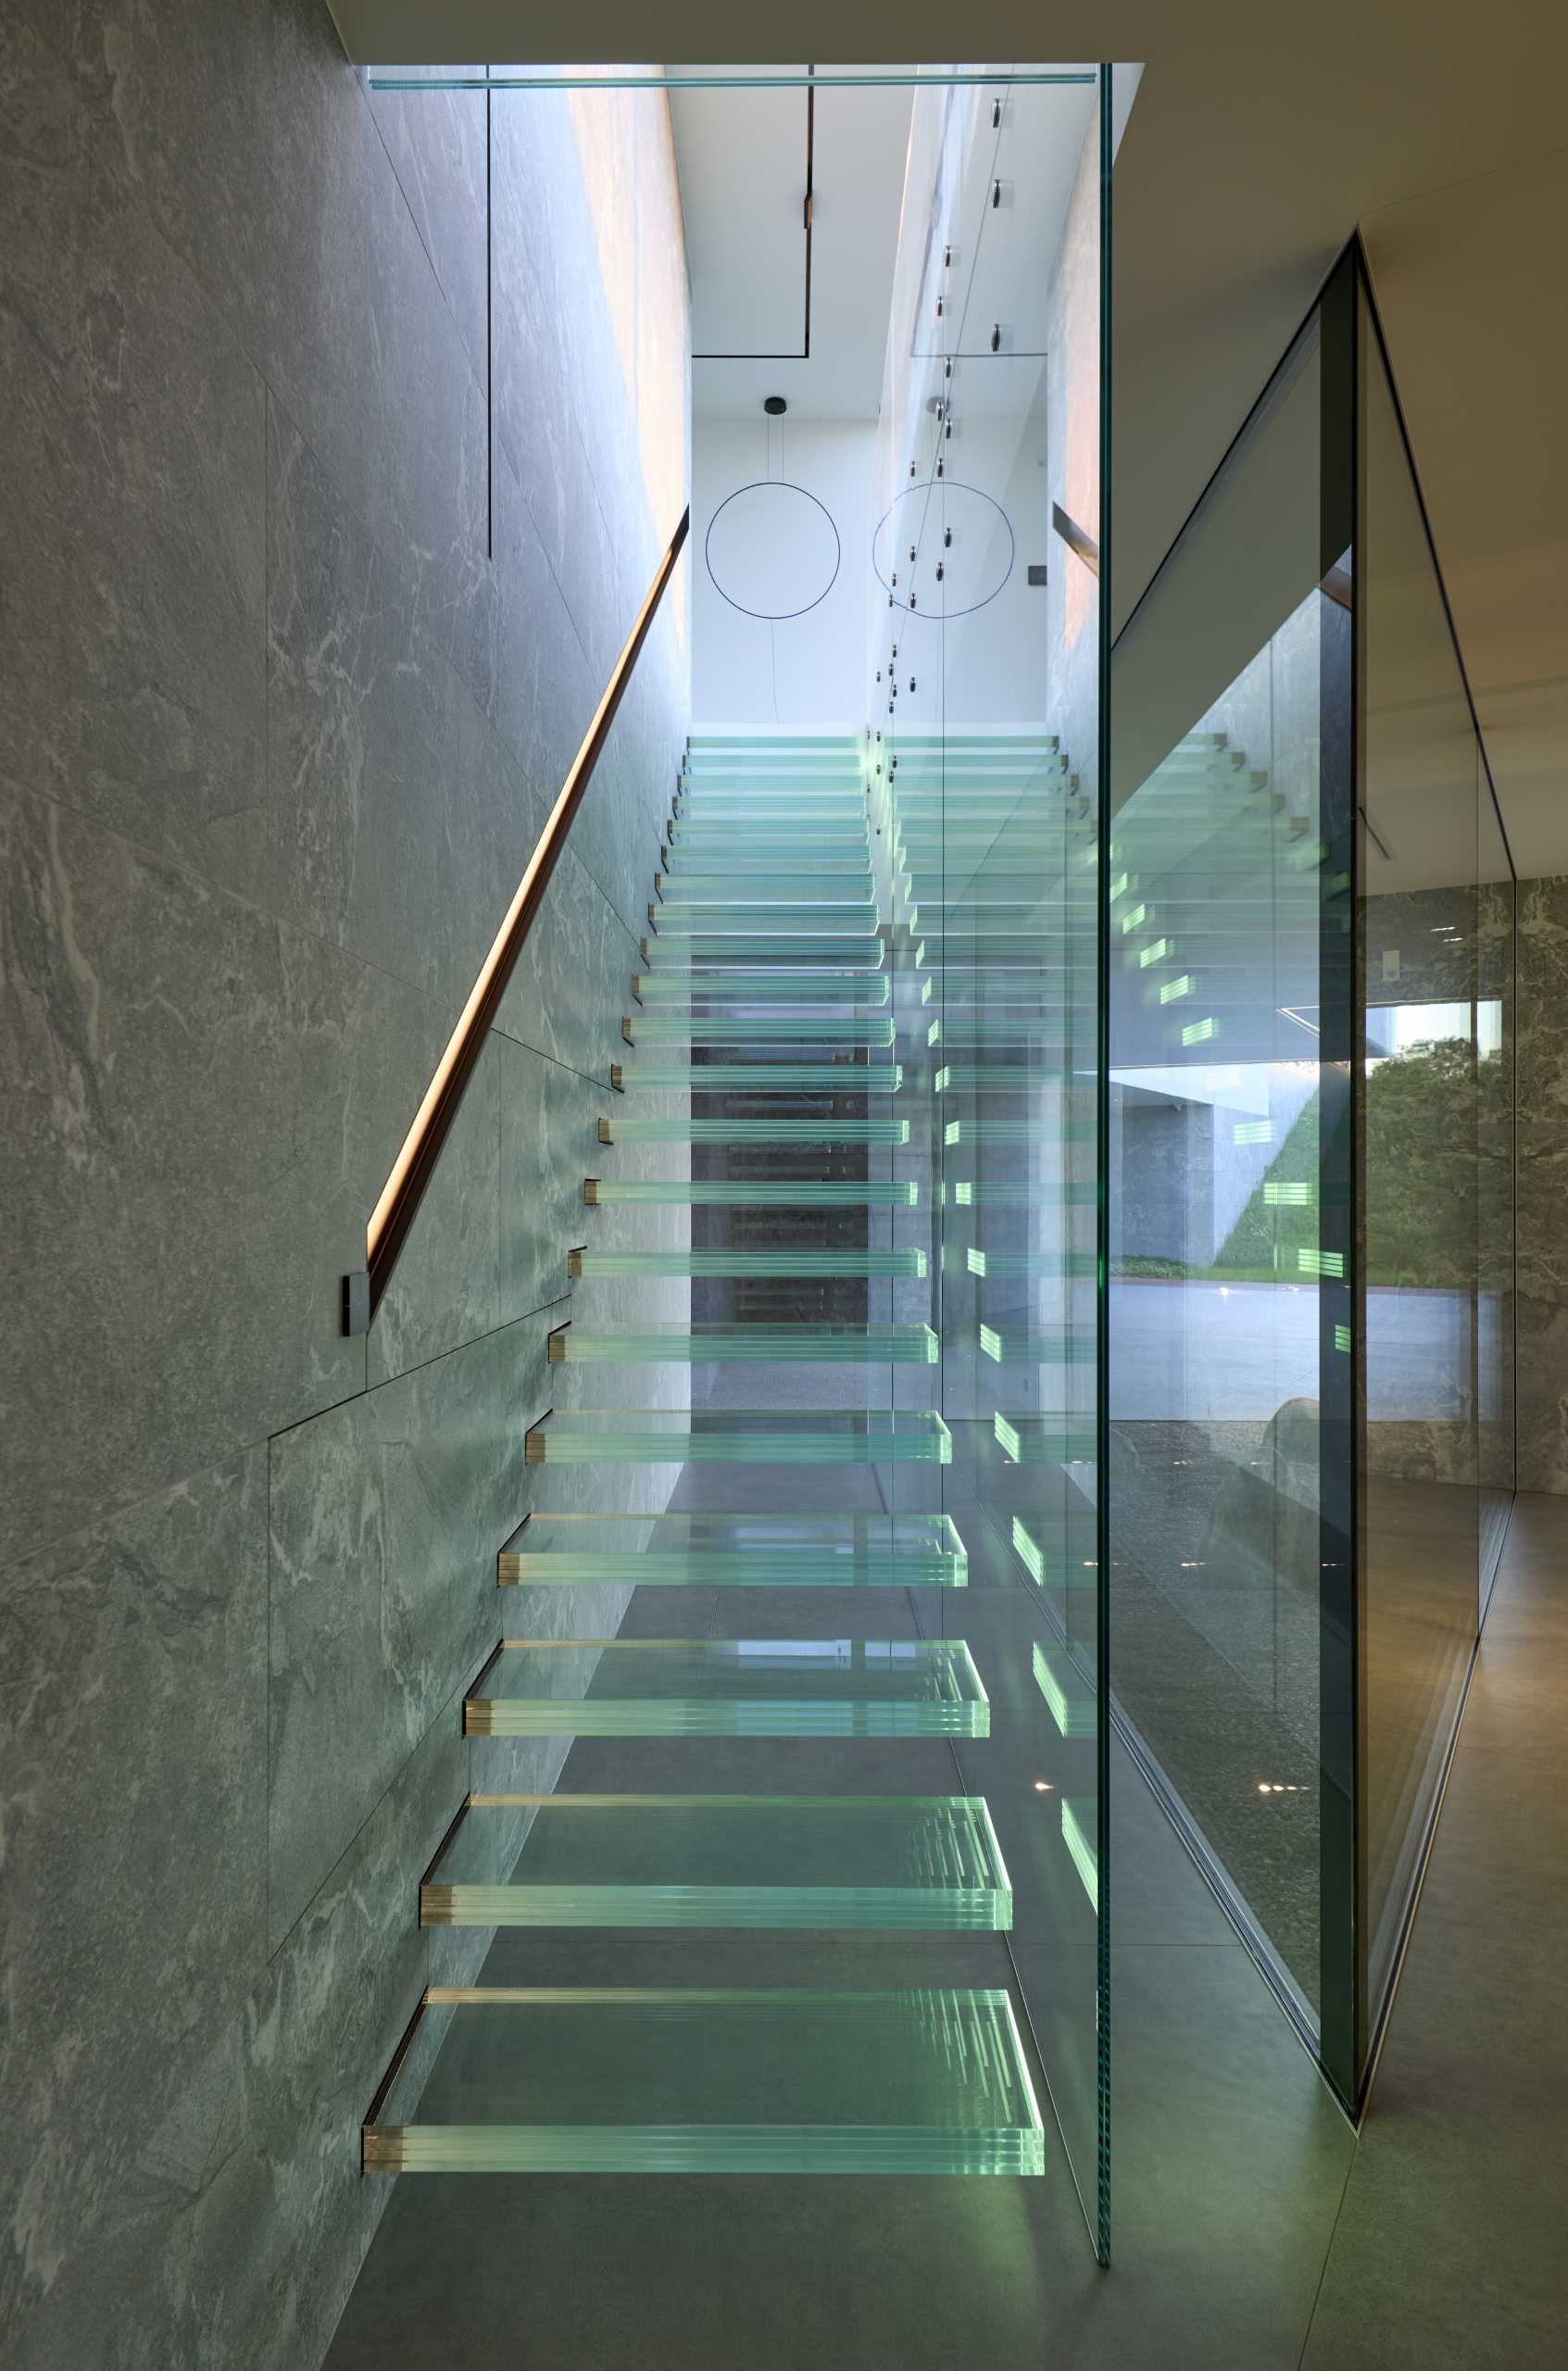 An eye-catching staircase made from glass.